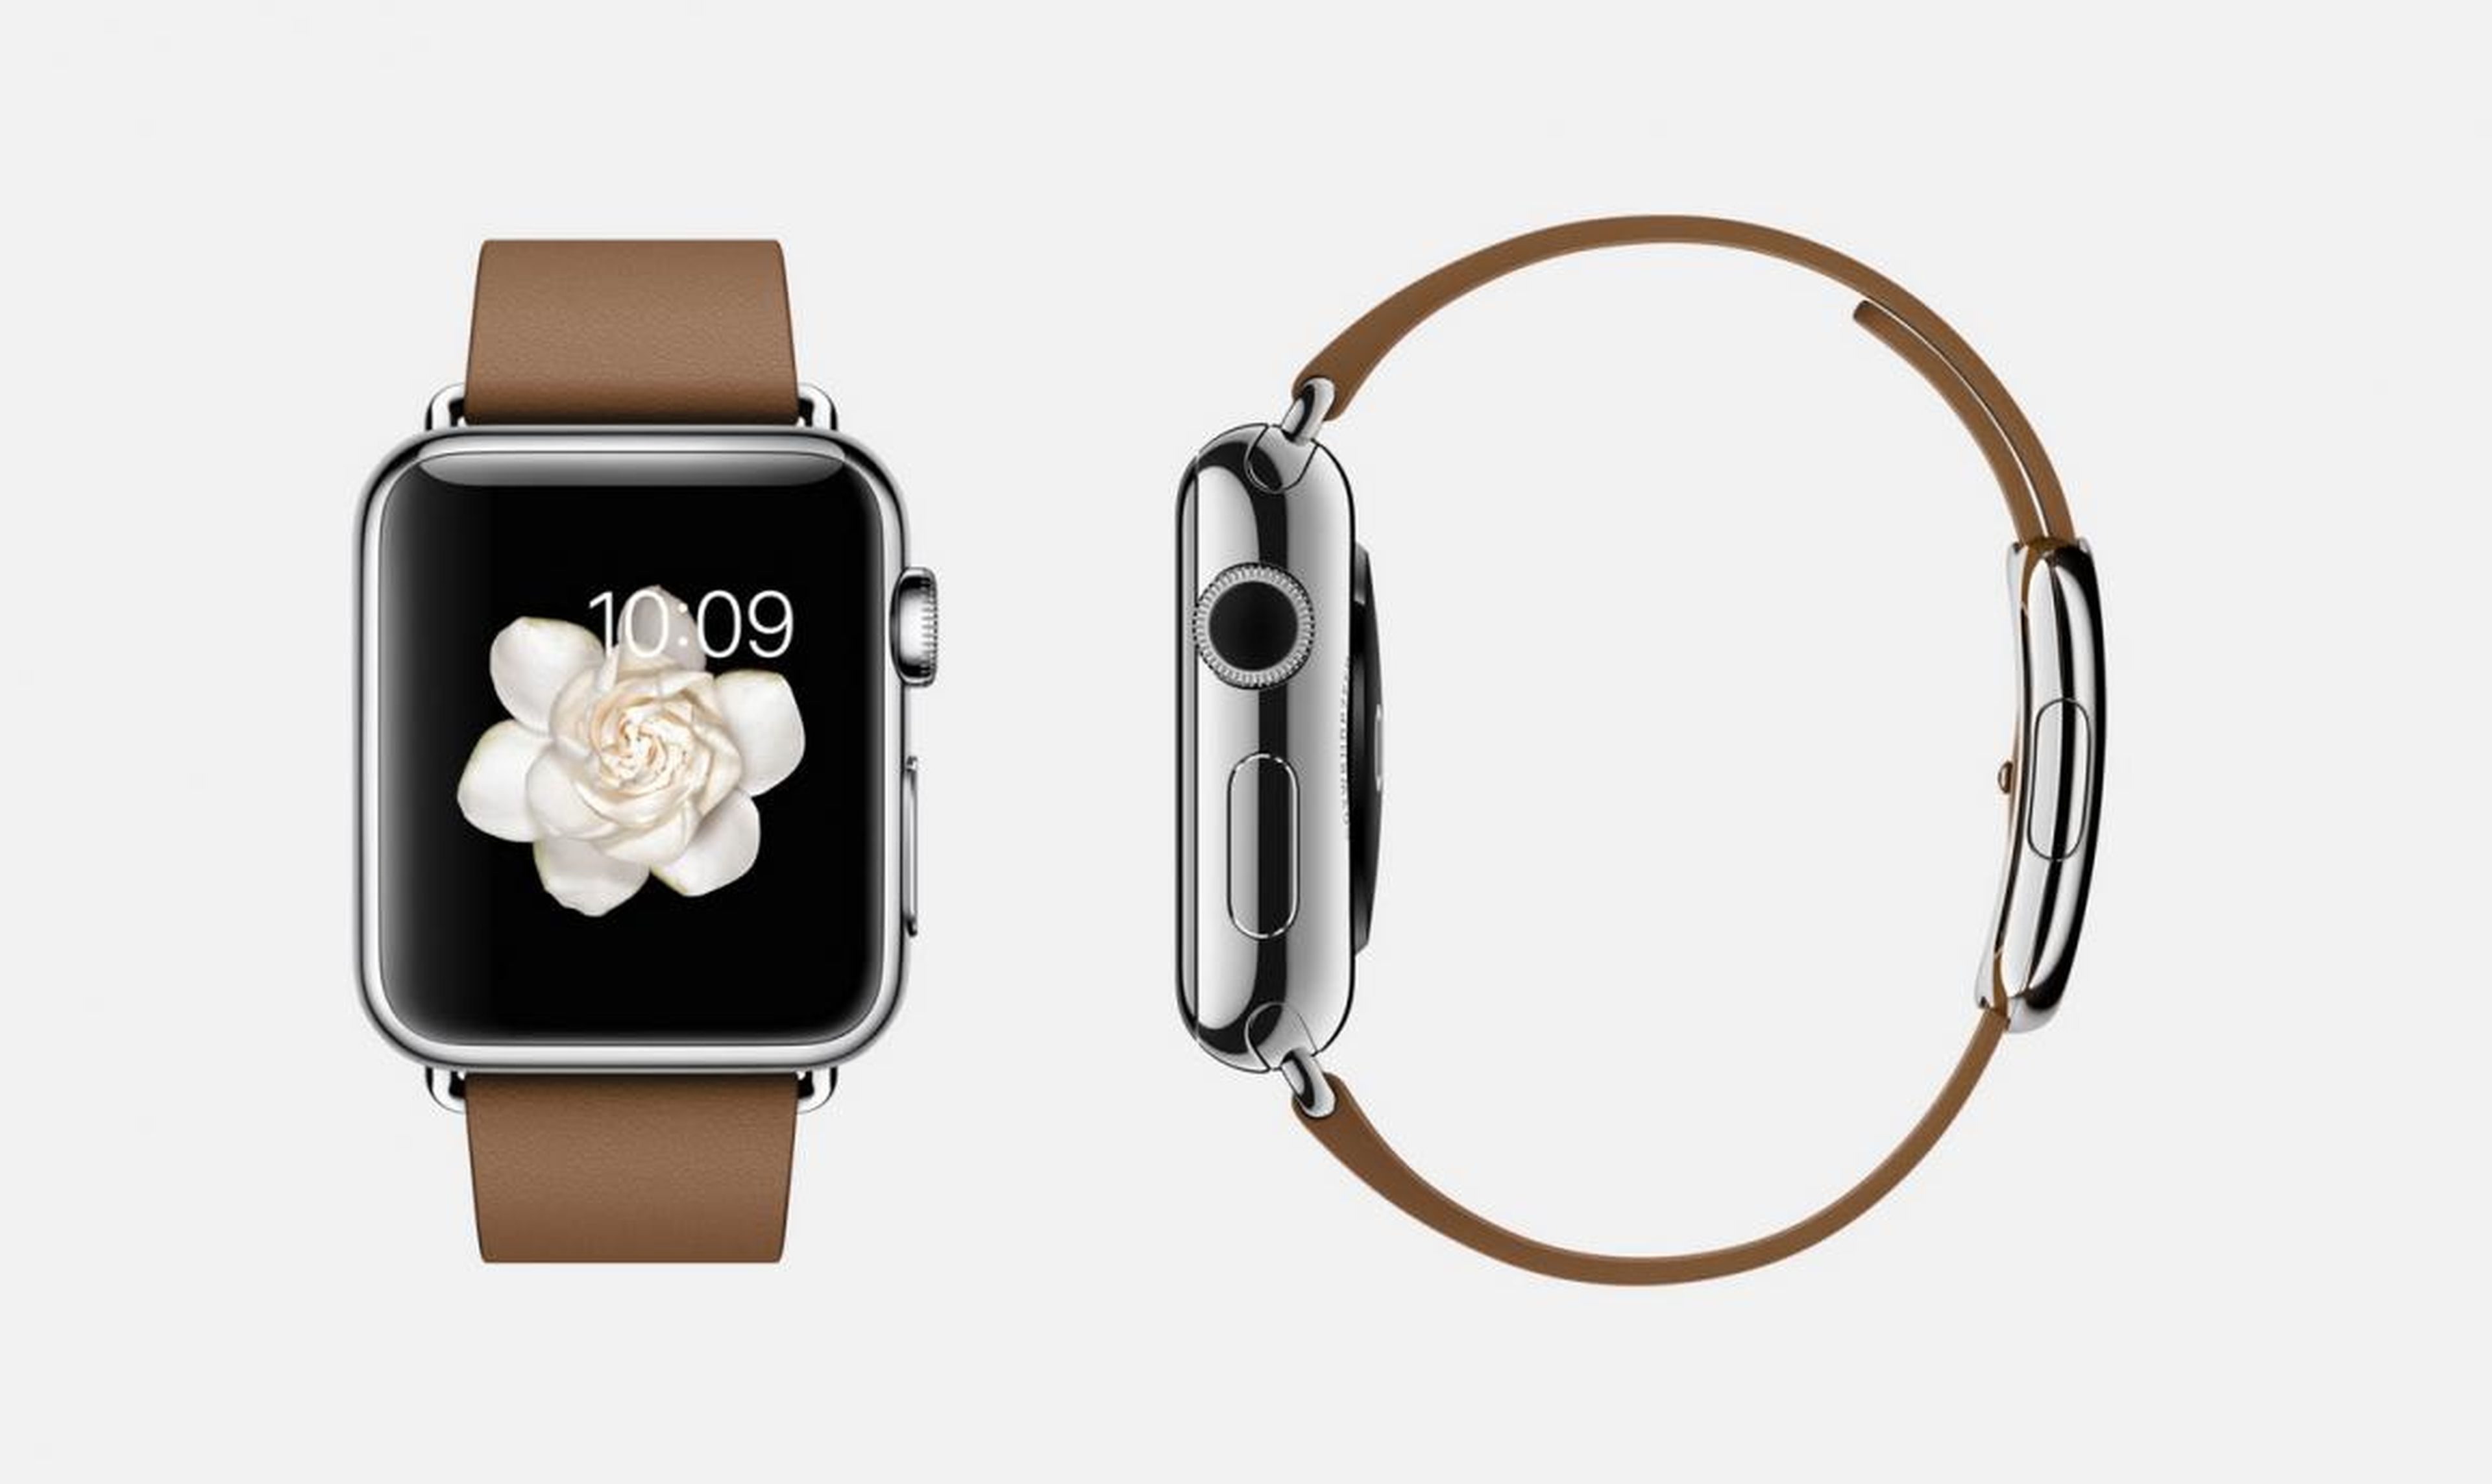 The blooming flowers on your Apple Watch: